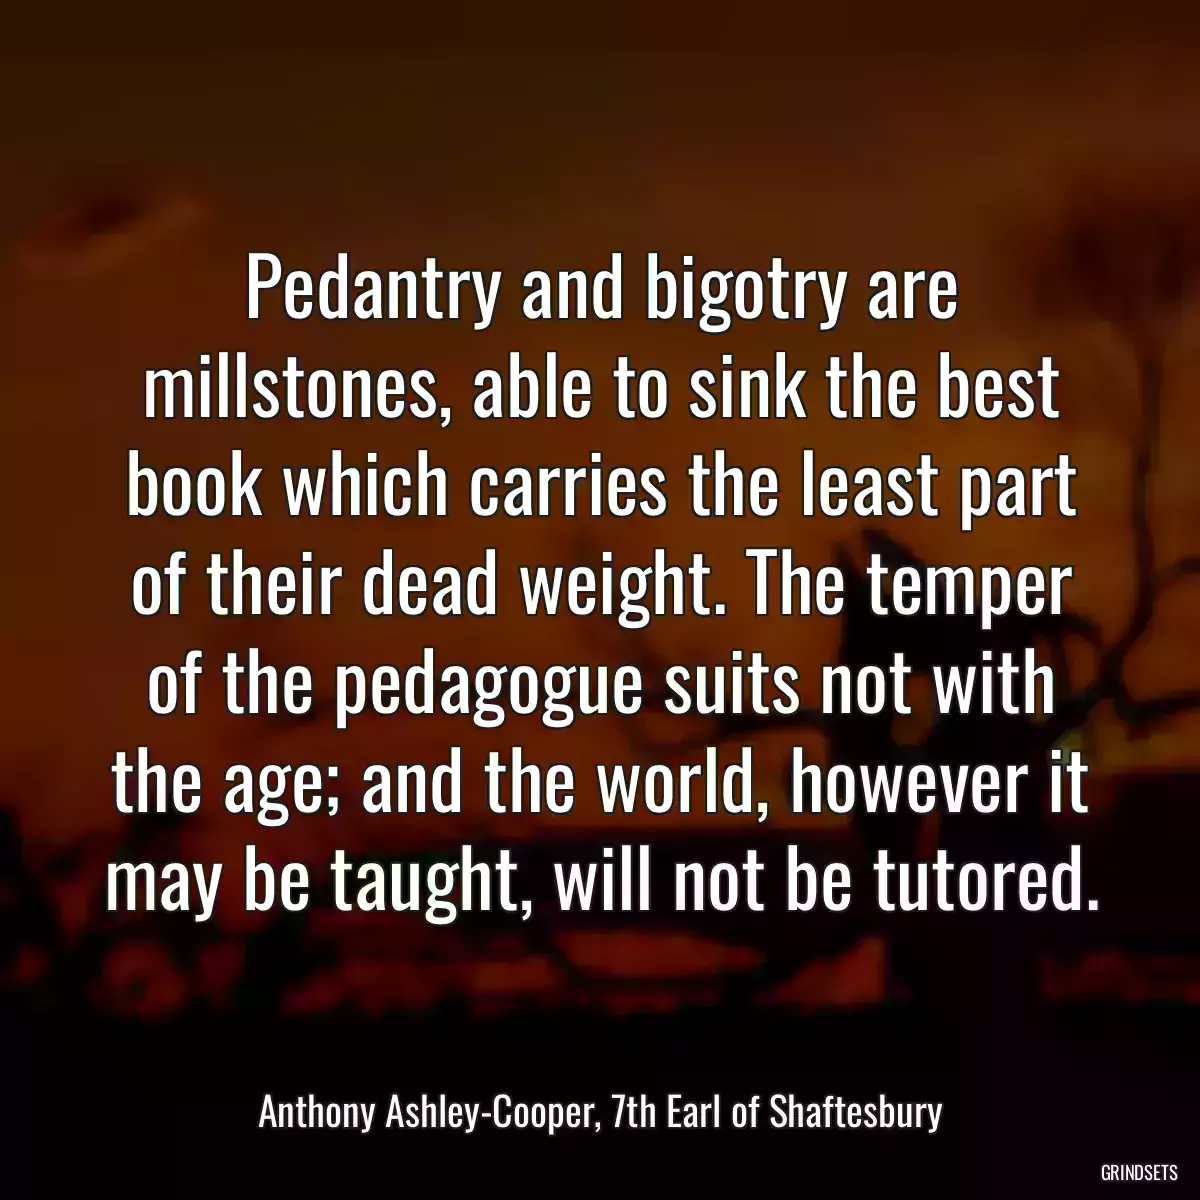 Pedantry and bigotry are millstones, able to sink the best book which carries the least part of their dead weight. The temper of the pedagogue suits not with the age; and the world, however it may be taught, will not be tutored.